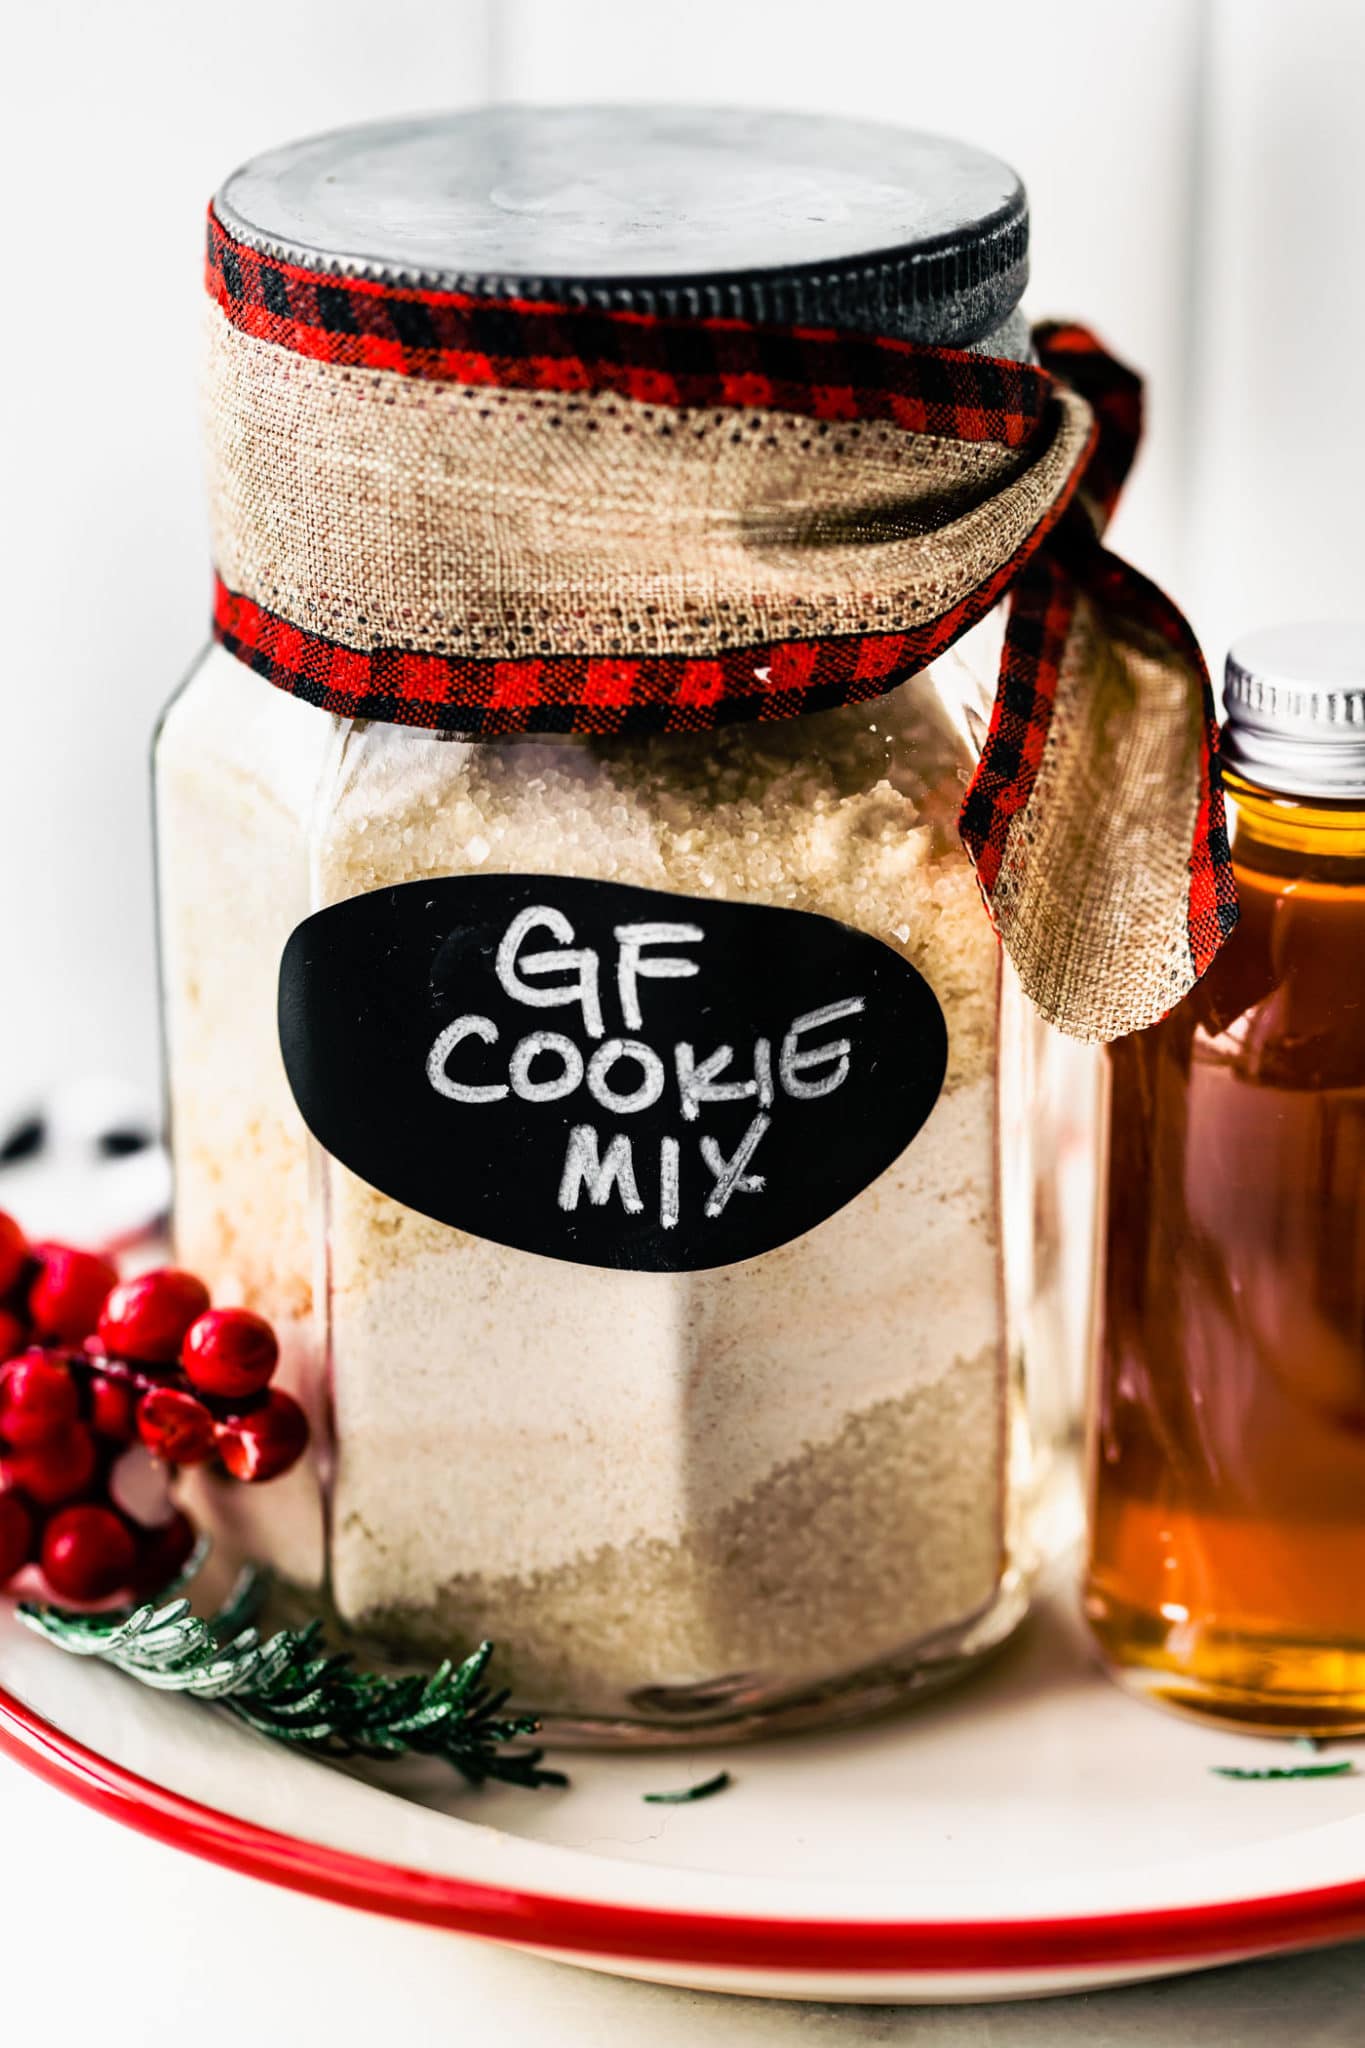 Gluten free cookie mix in a jar with black label with white words for gf cookie mix, a Christmas ribbon tied along the top of jar.